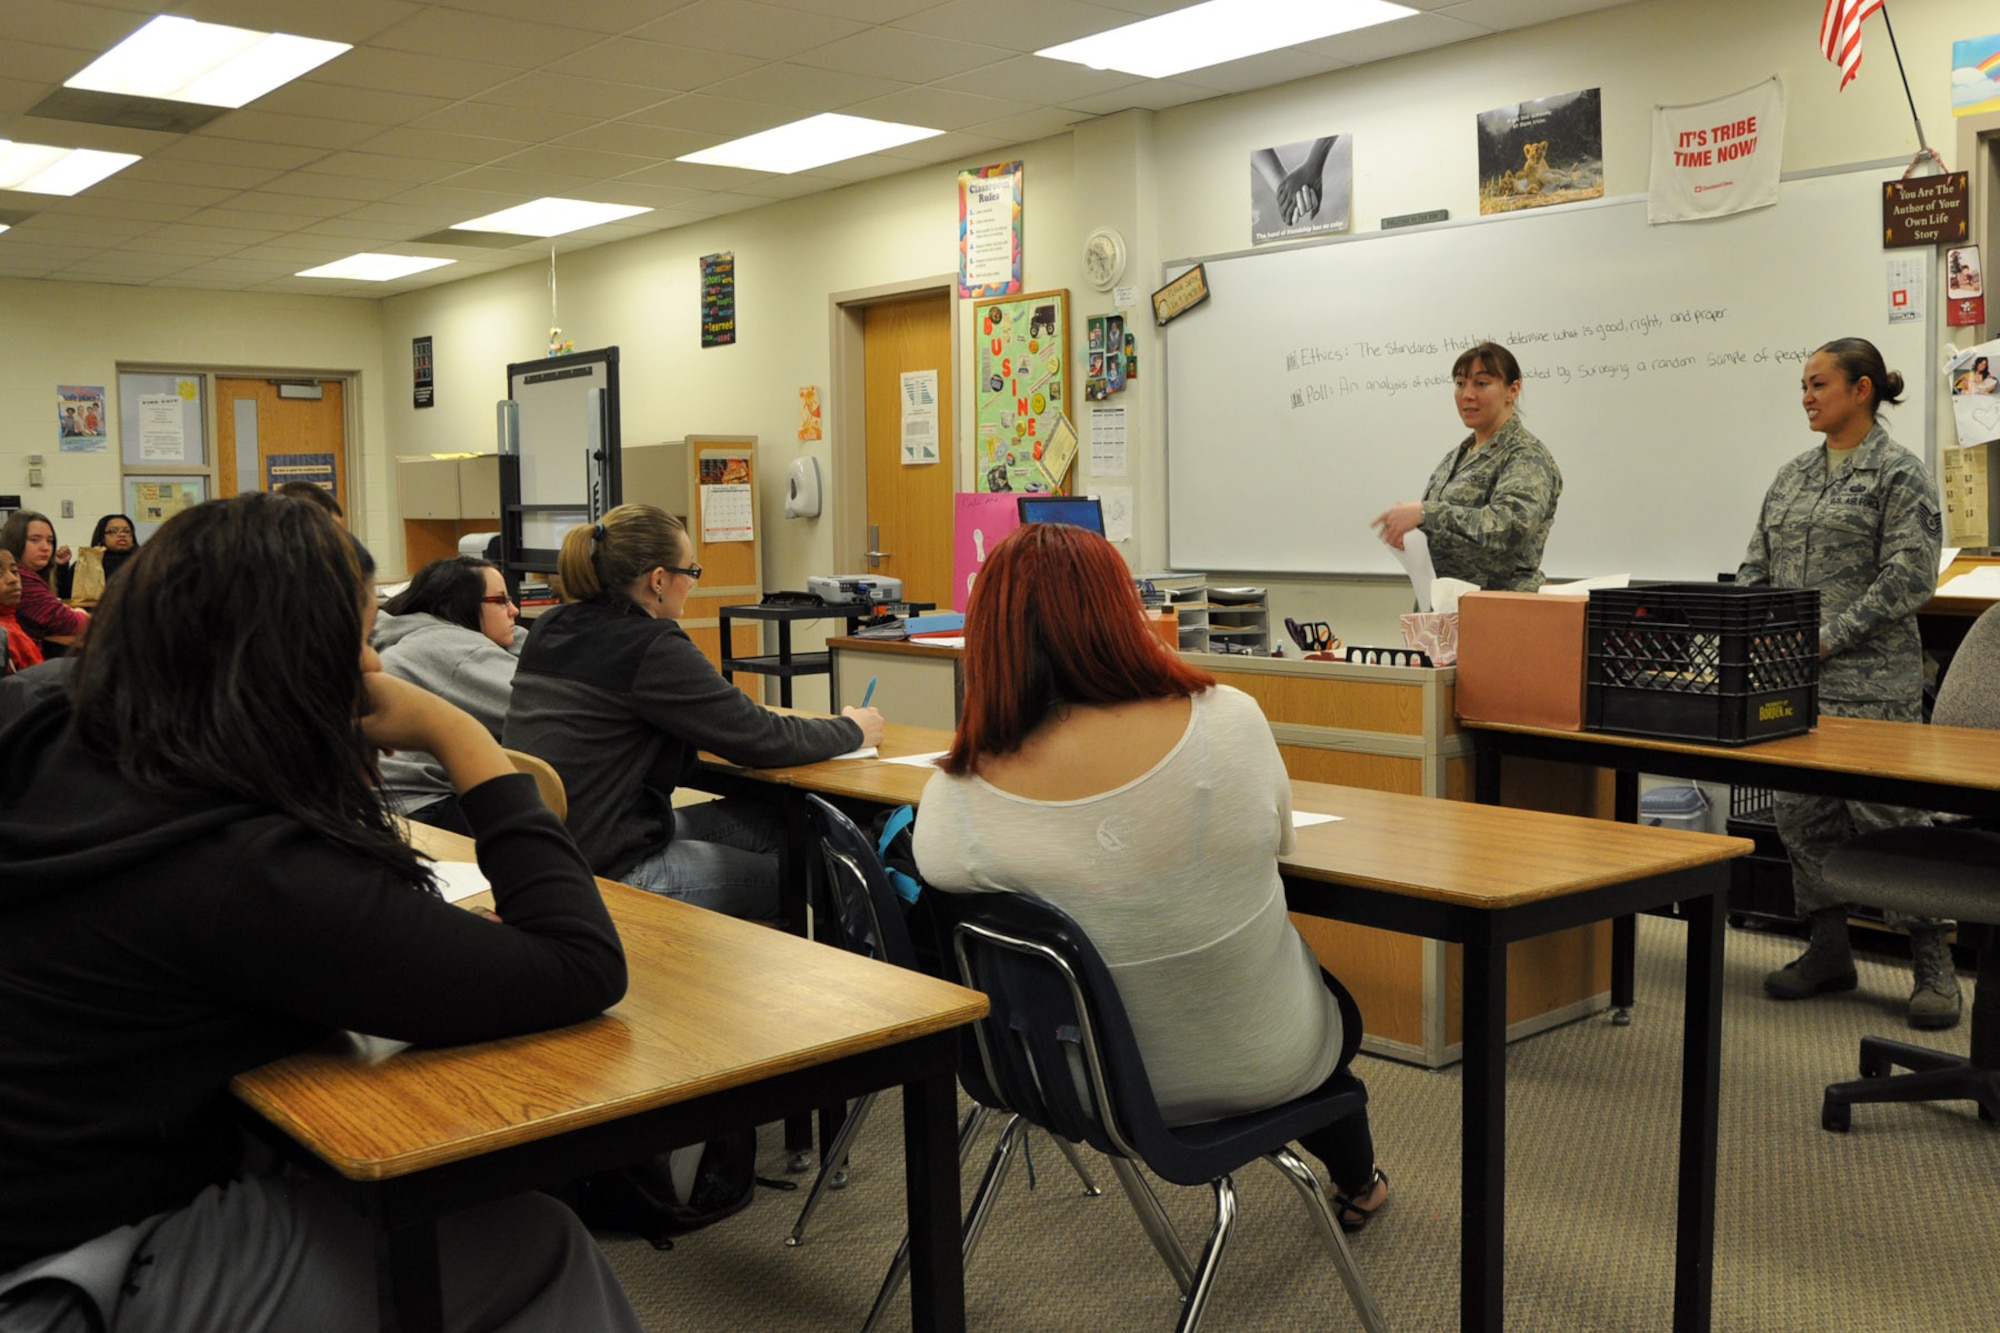 910th-citizen-airmen-pass-along-ethics-lesson-to-area-high-school-students-air-force-reserve